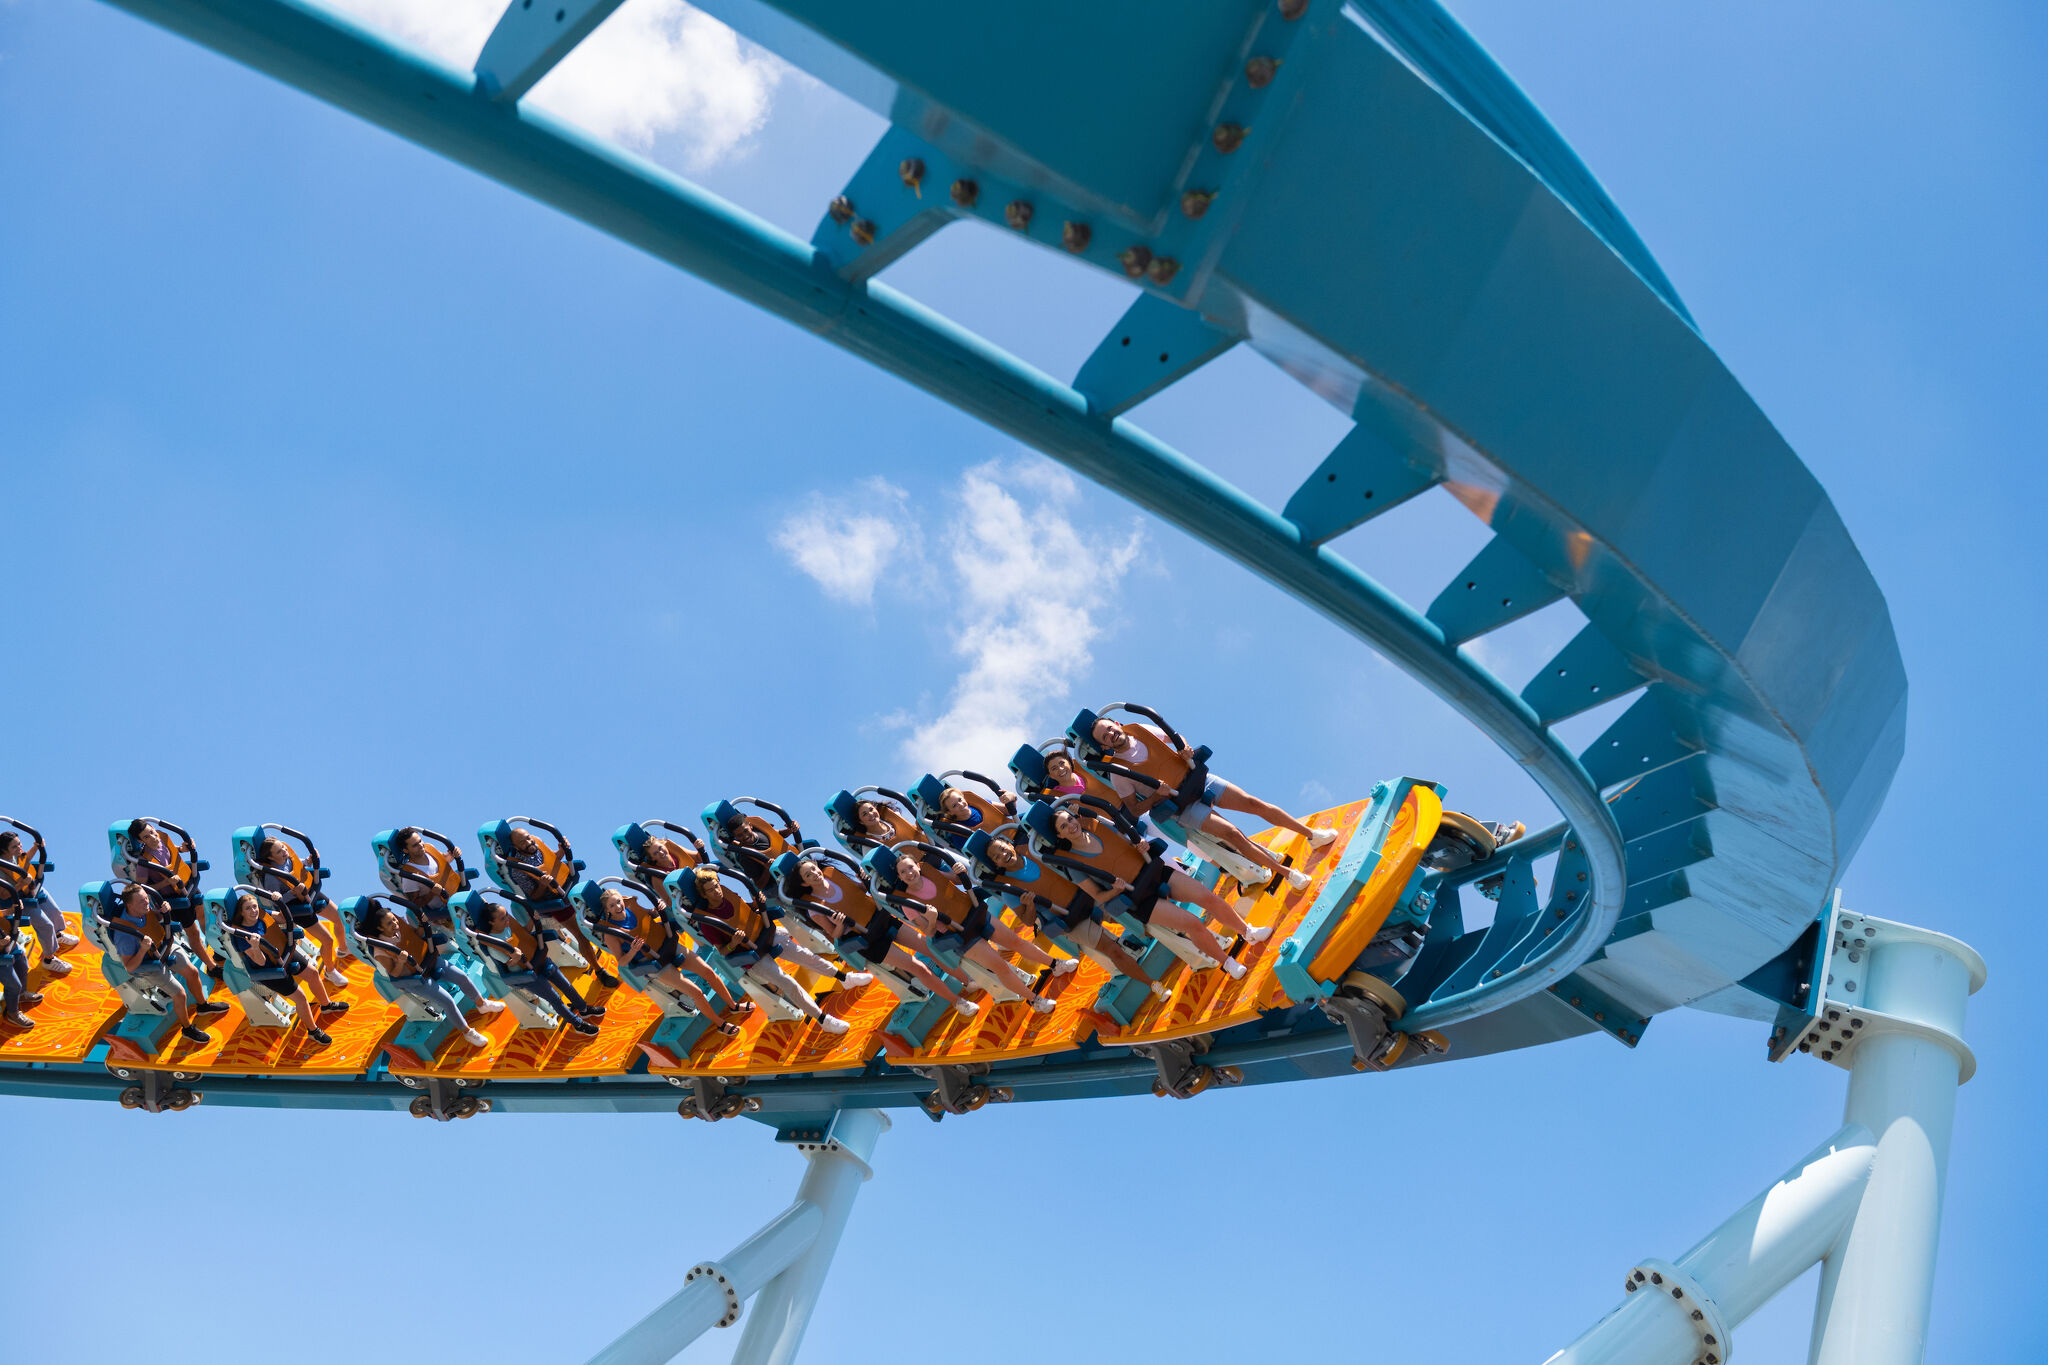 All to know about Orlando theme parks from a travel expert